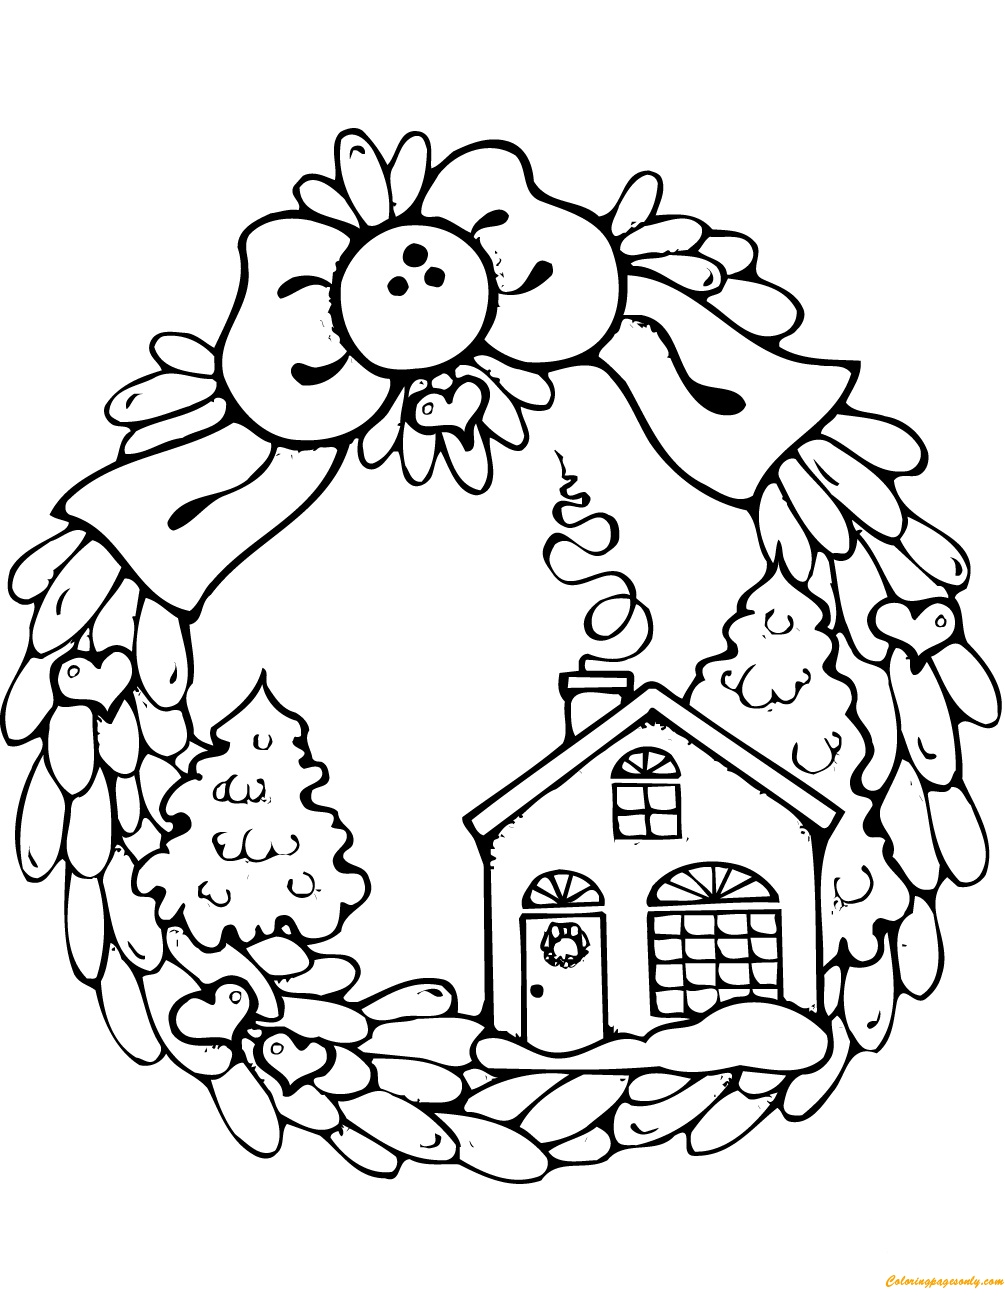 printable-gingerbread-house-coloring-pages-for-kids